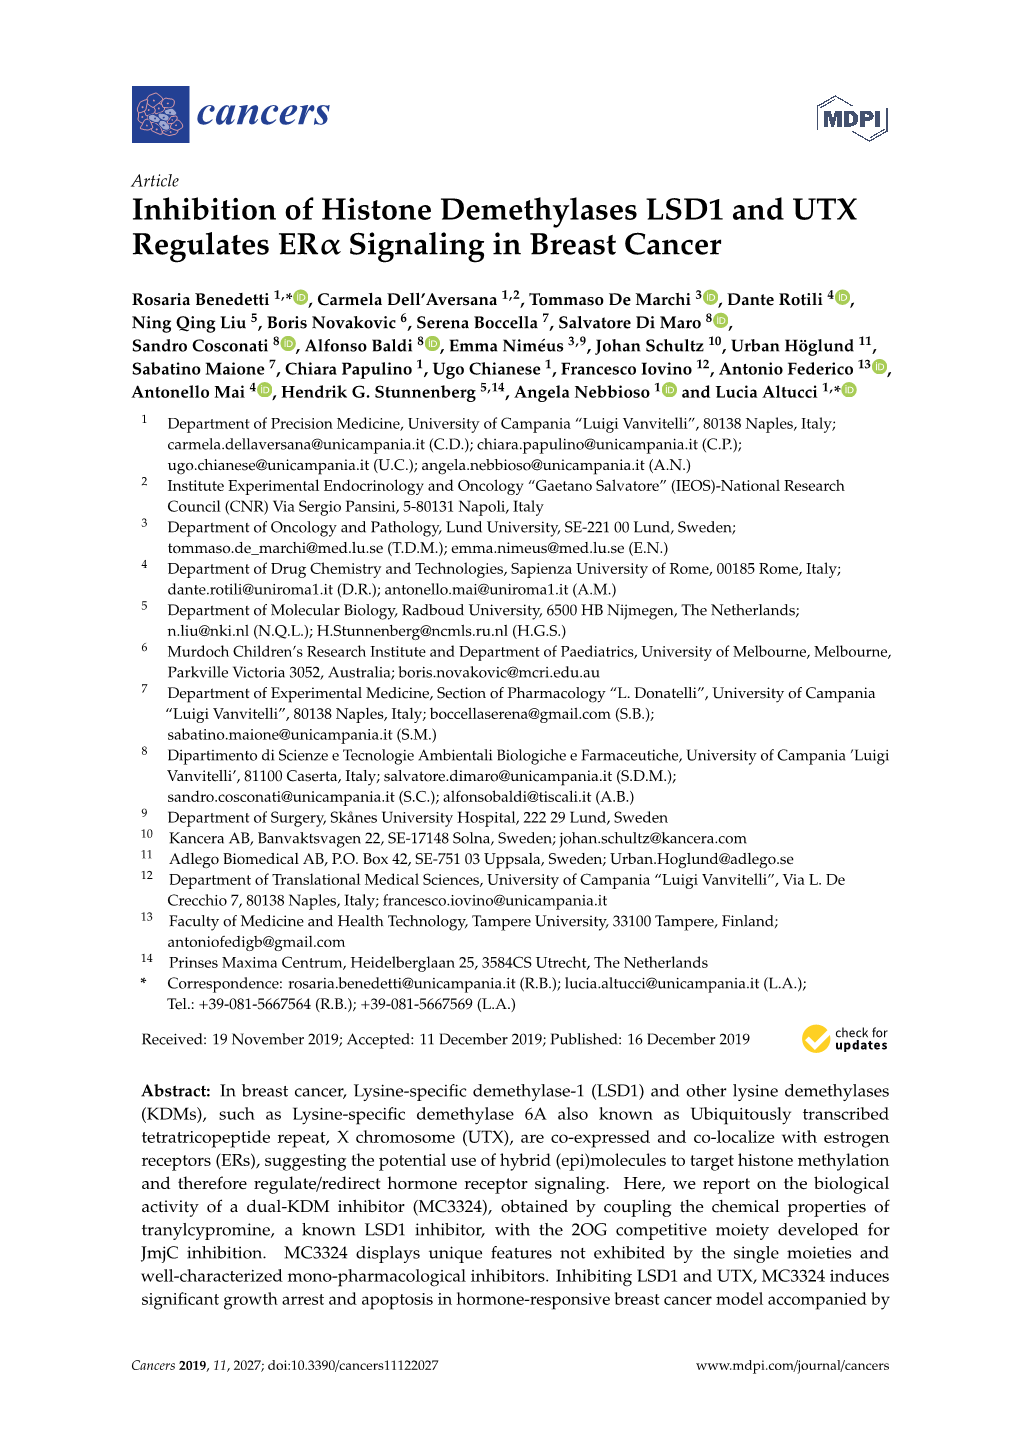 Inhibition of Histone Demethylases LSD1 and UTX Regulates Erα Signaling in Breast Cancer